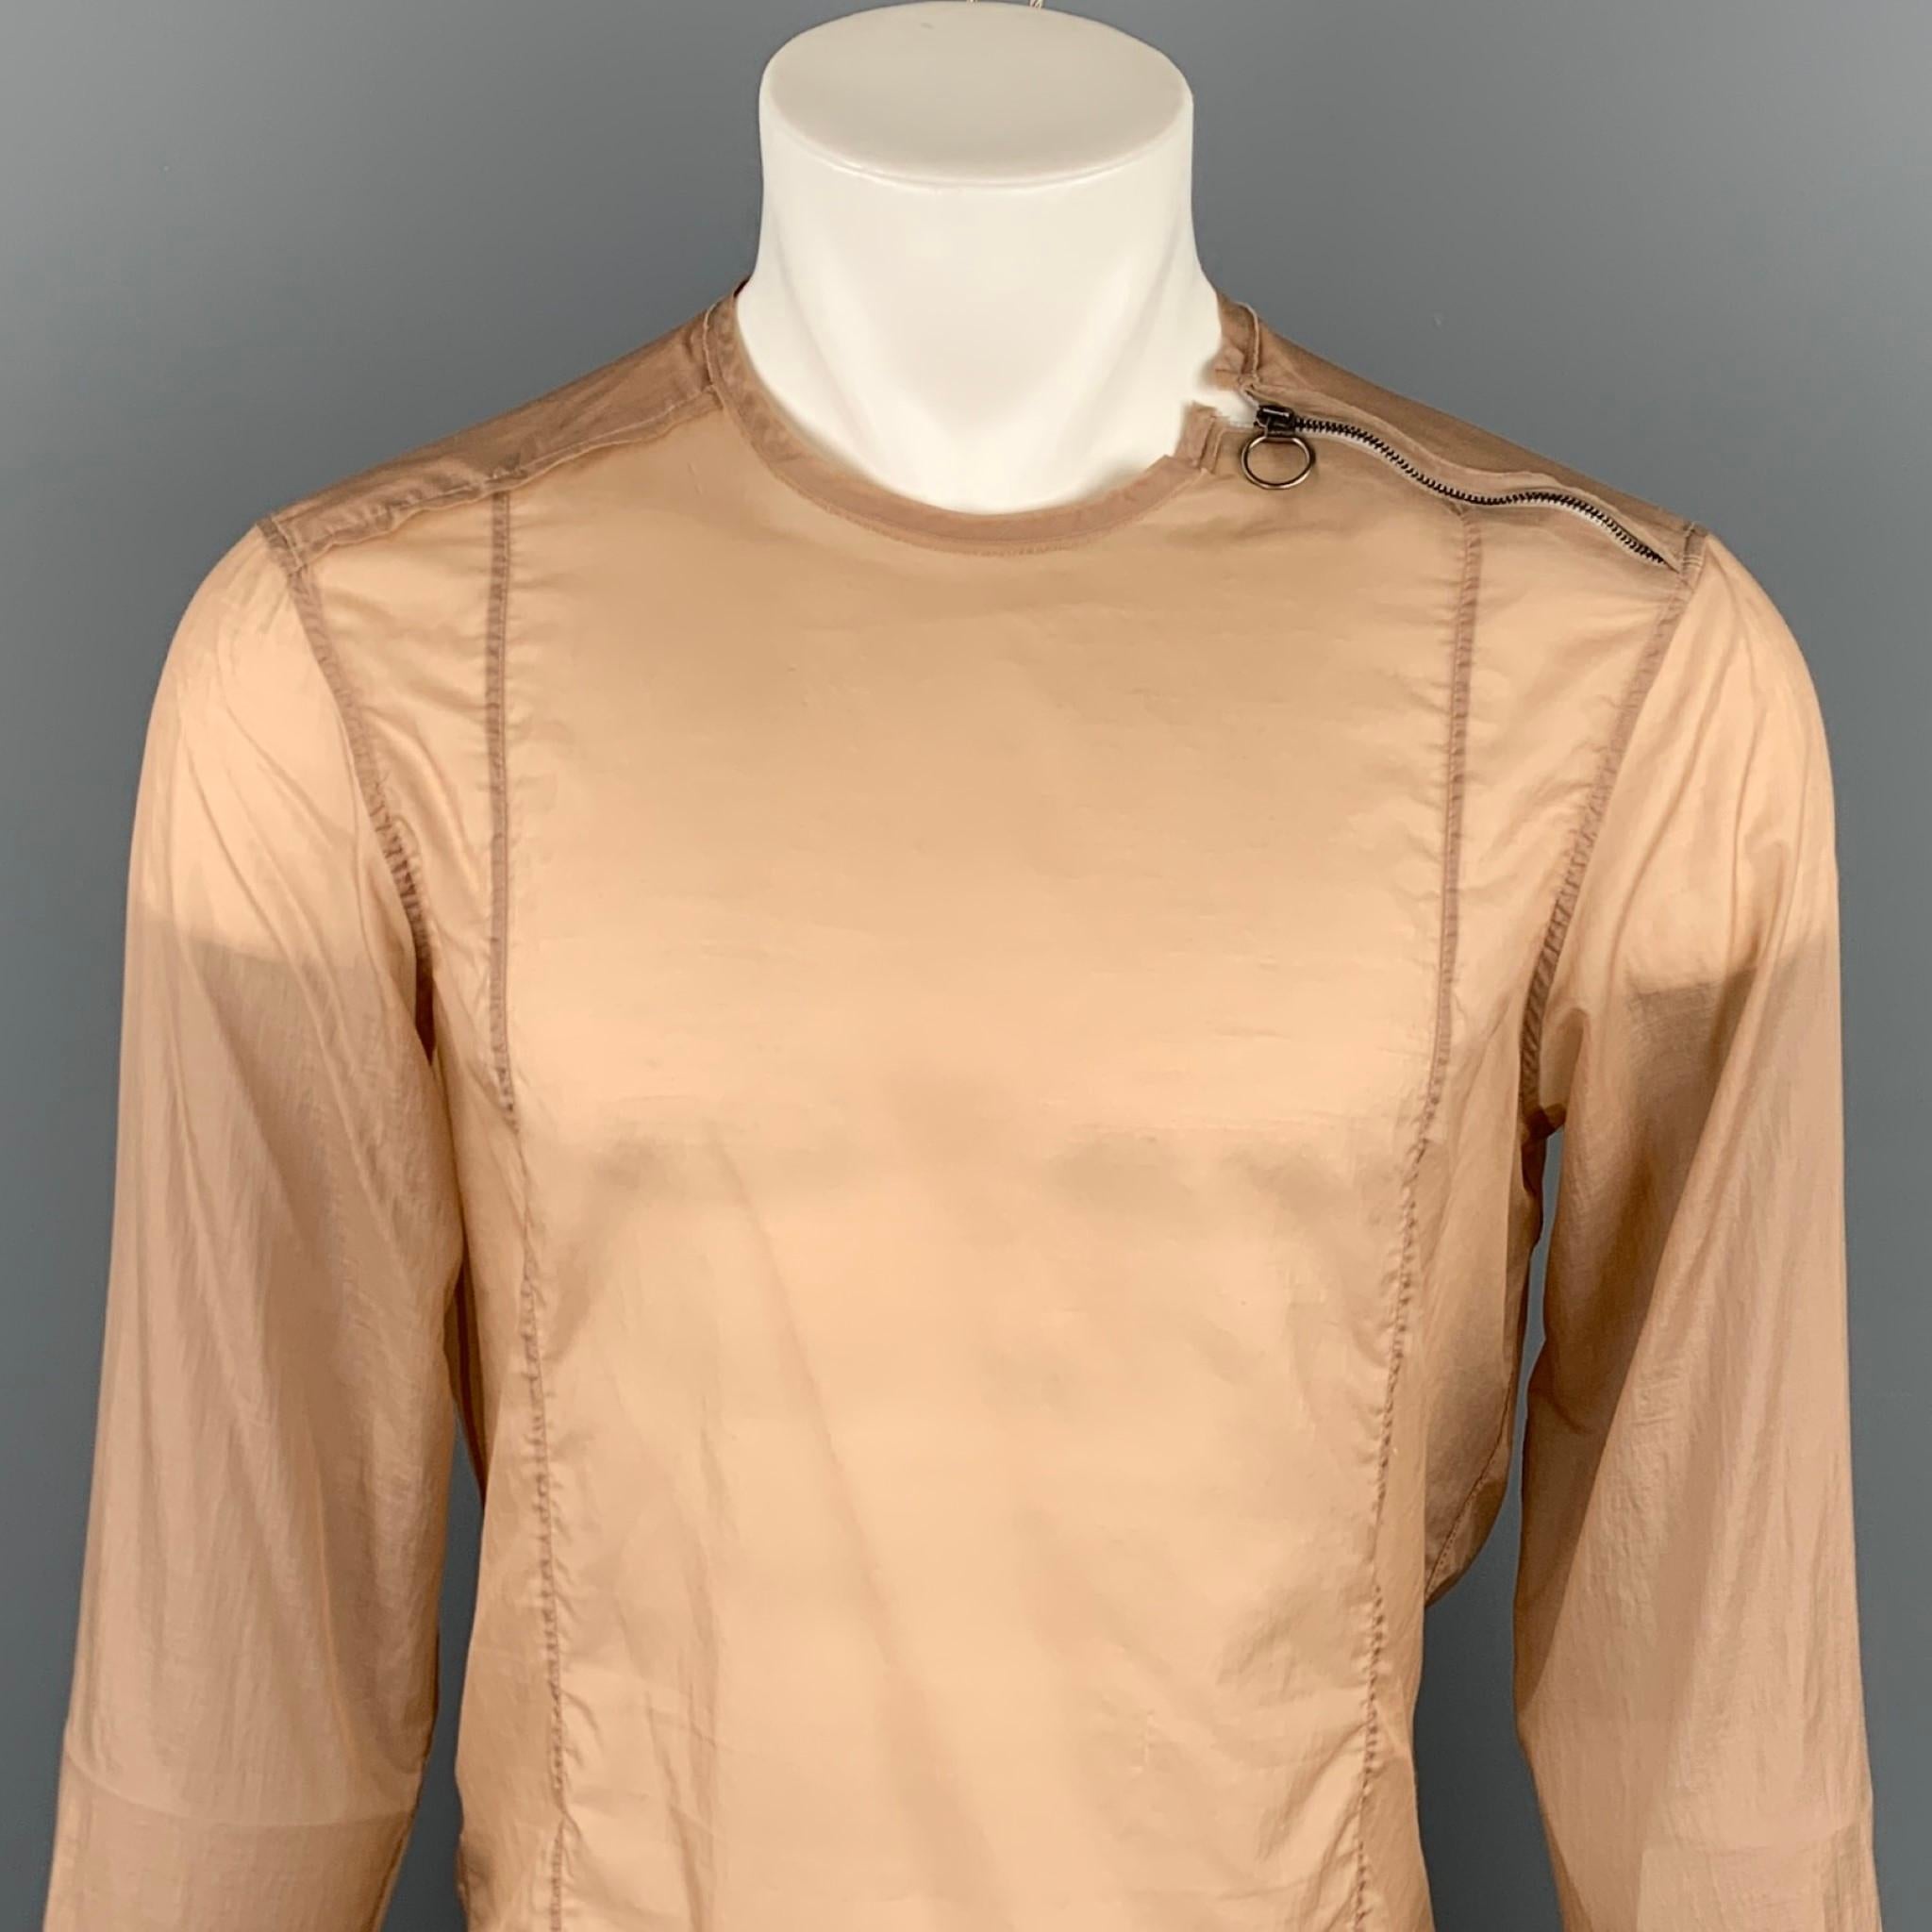 LANVIN long sleeve shirt comes in a tan polyamide blend featuring a slim fit, top stitching, buttoned sleeves, and a side zipper closure. Made in Italy.

Very Good Pre-Owned Condition.
Marked: 39/15.5

Measurements:

Shoulder: 18 in.
Chest: 42